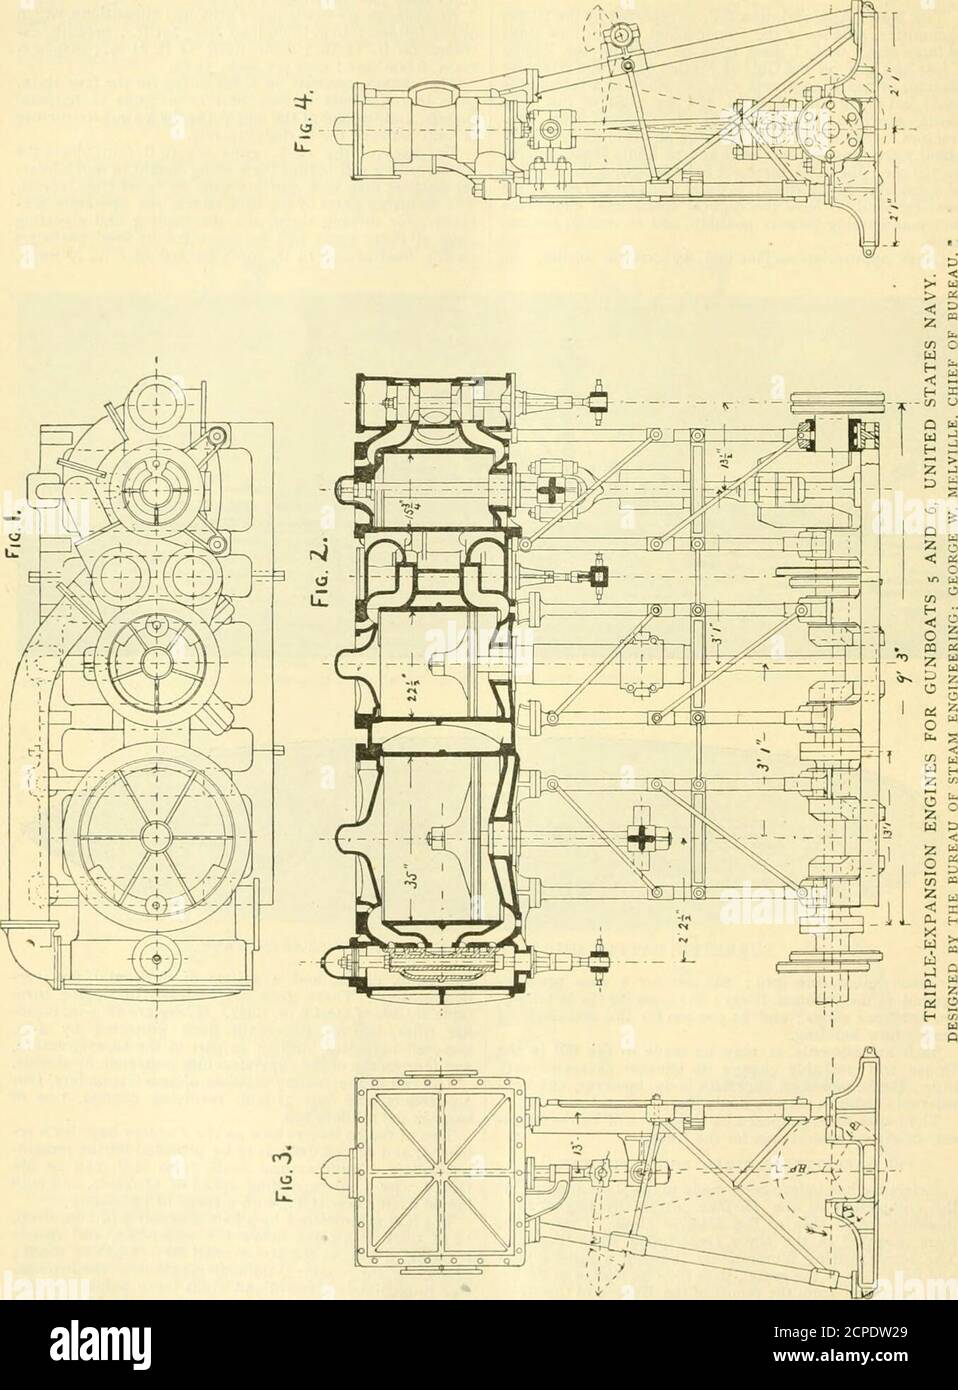 . The railroad and engineering journal . s, two on the main deck protected by 4-in.armored barbettes built in as part of the superstructure,and four on top of the superstructure protected by shields. The rest of the battery consists of two 6-pounders, four3-pounders and four 37-mm. revolving cannon, two ofthem in the military top. Two of the IP boilers now in the Puritan have been re-moved, and forced draft is to be provided for the remain-ing boilers. With natural draft 3,000 H.P. can be ob-tained with a corresponding speed of 12 knots, and withforced draft 4,000 H.P., with a speed of 13 knot Stock Photo